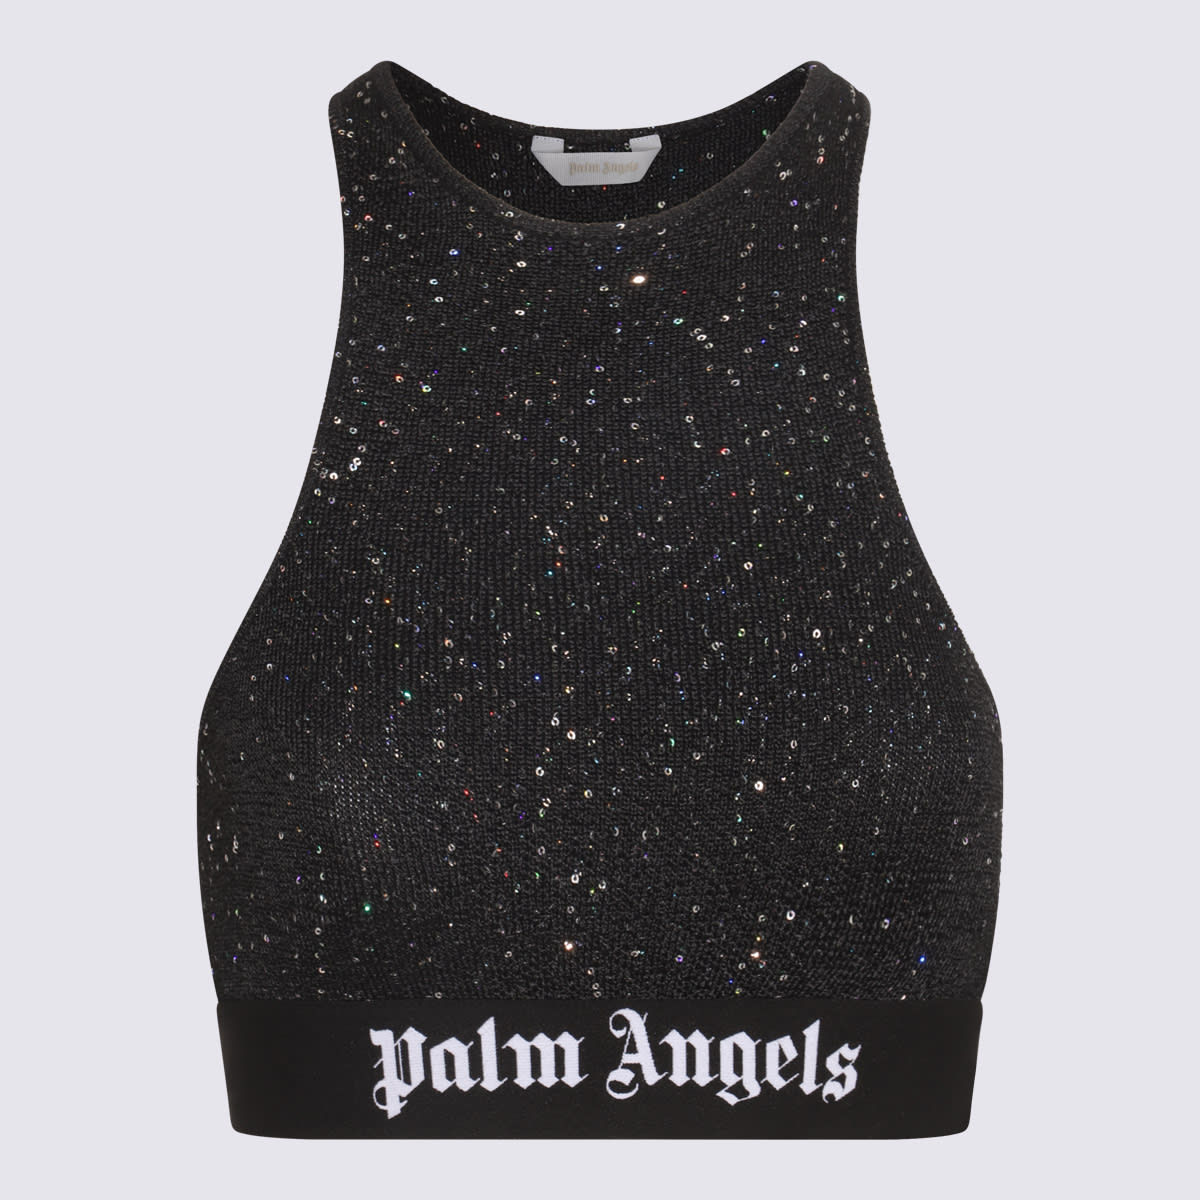 Palm Angels Black And White Viscose Blend Top